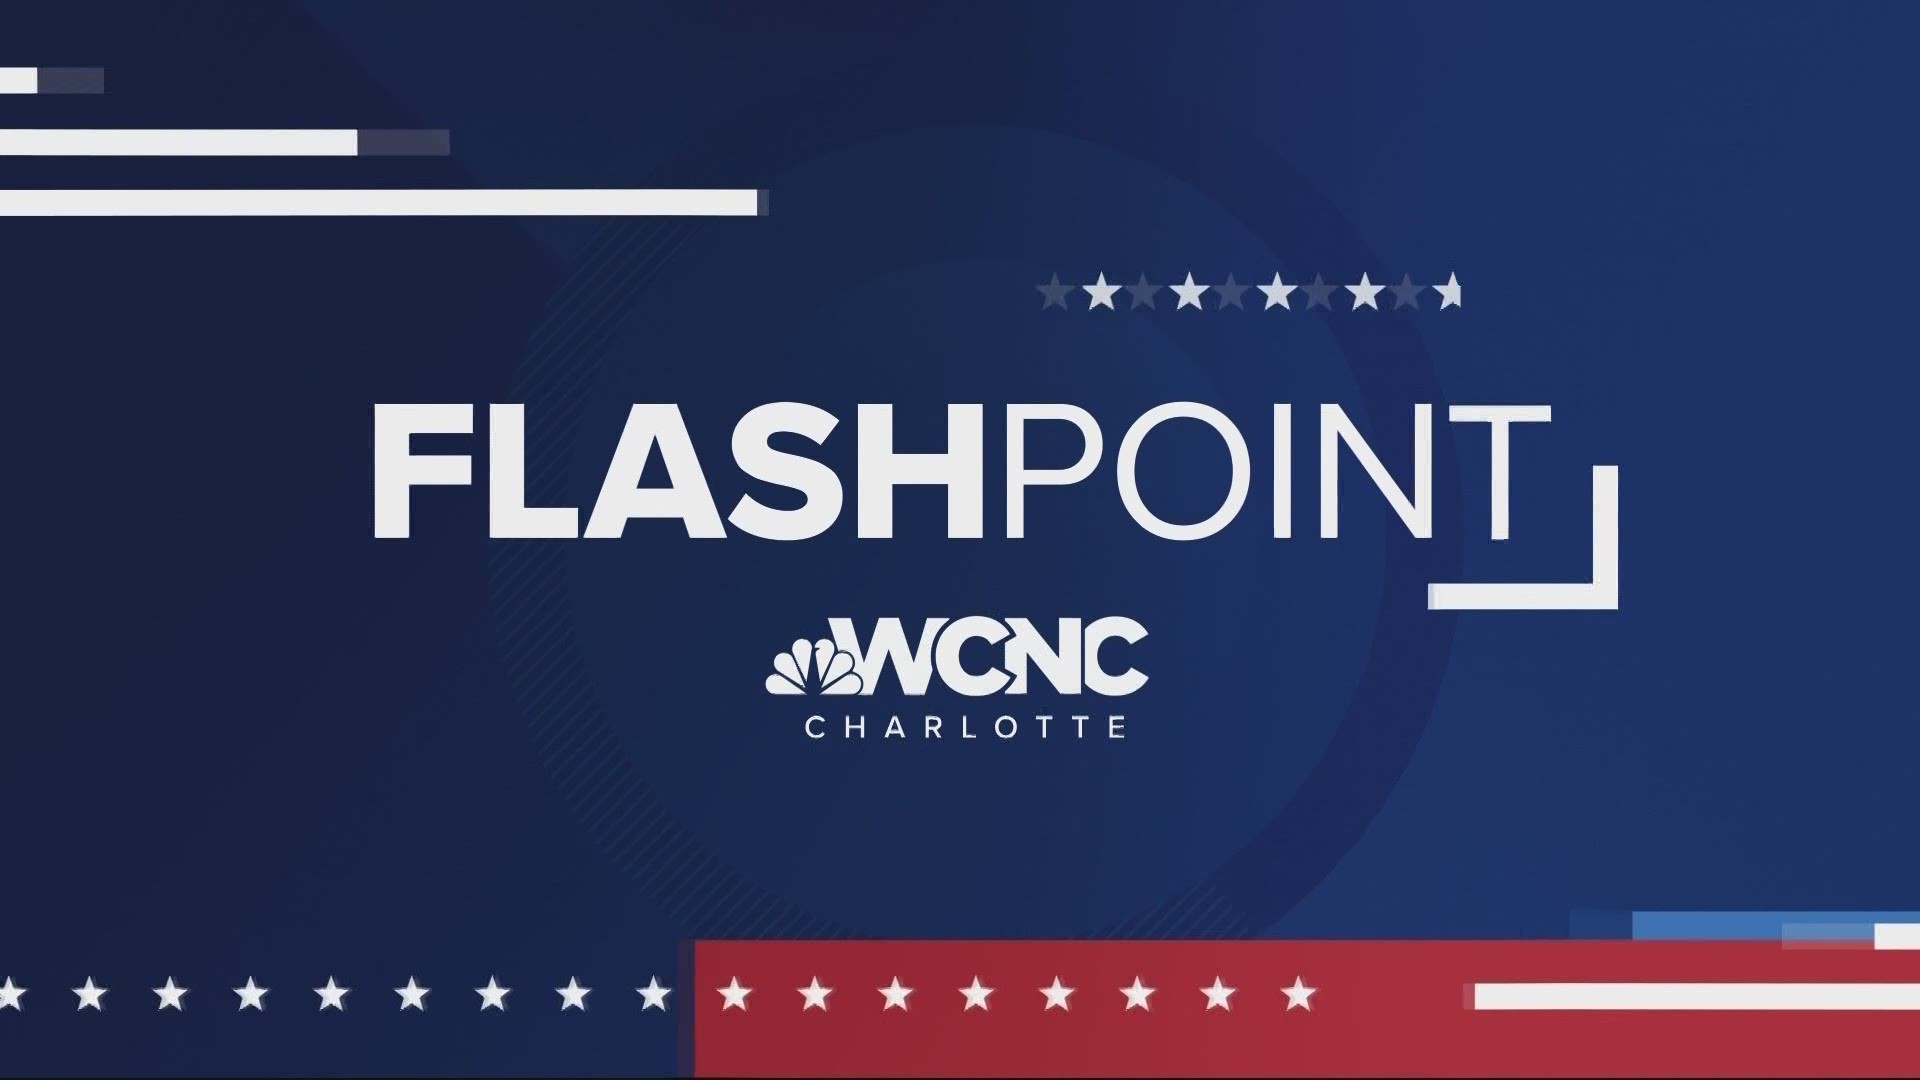 Flashpoint 11/22: Dr. Karla Robinson share her idea for a safe Thanksgiving gathering